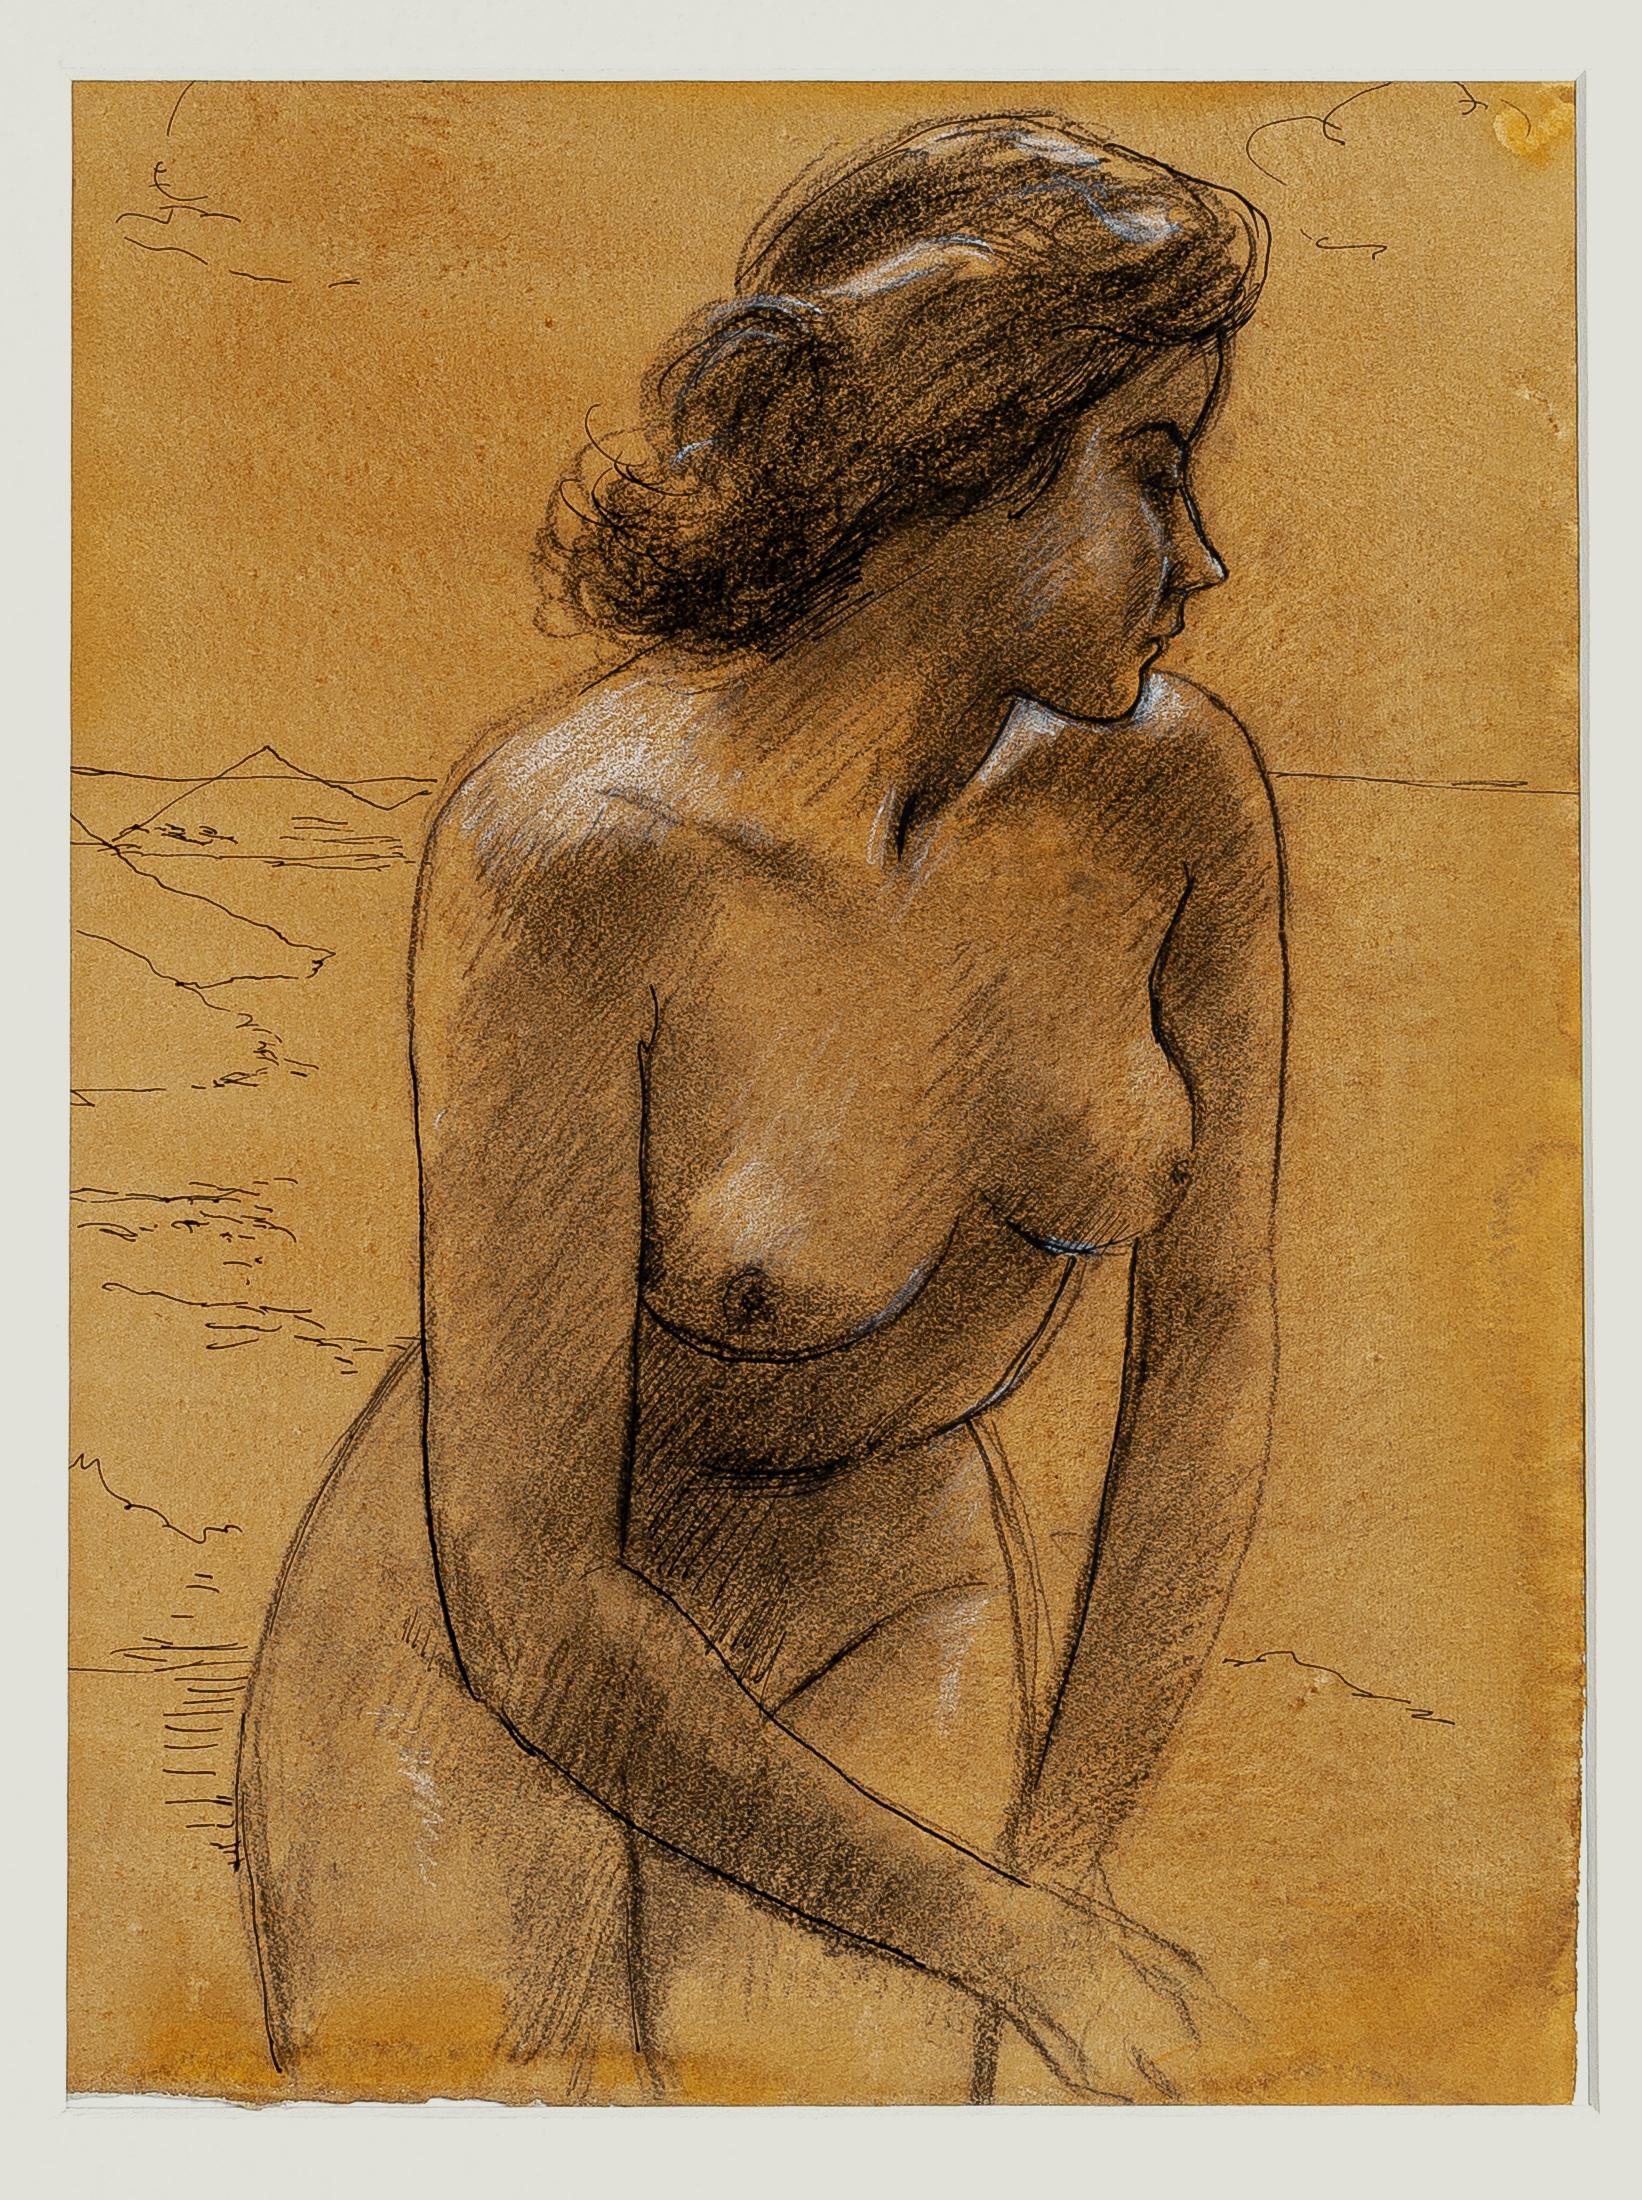 Unknown Figurative Art - Nude Woman - Pencil And Pastel Drawing - Early 20th Century